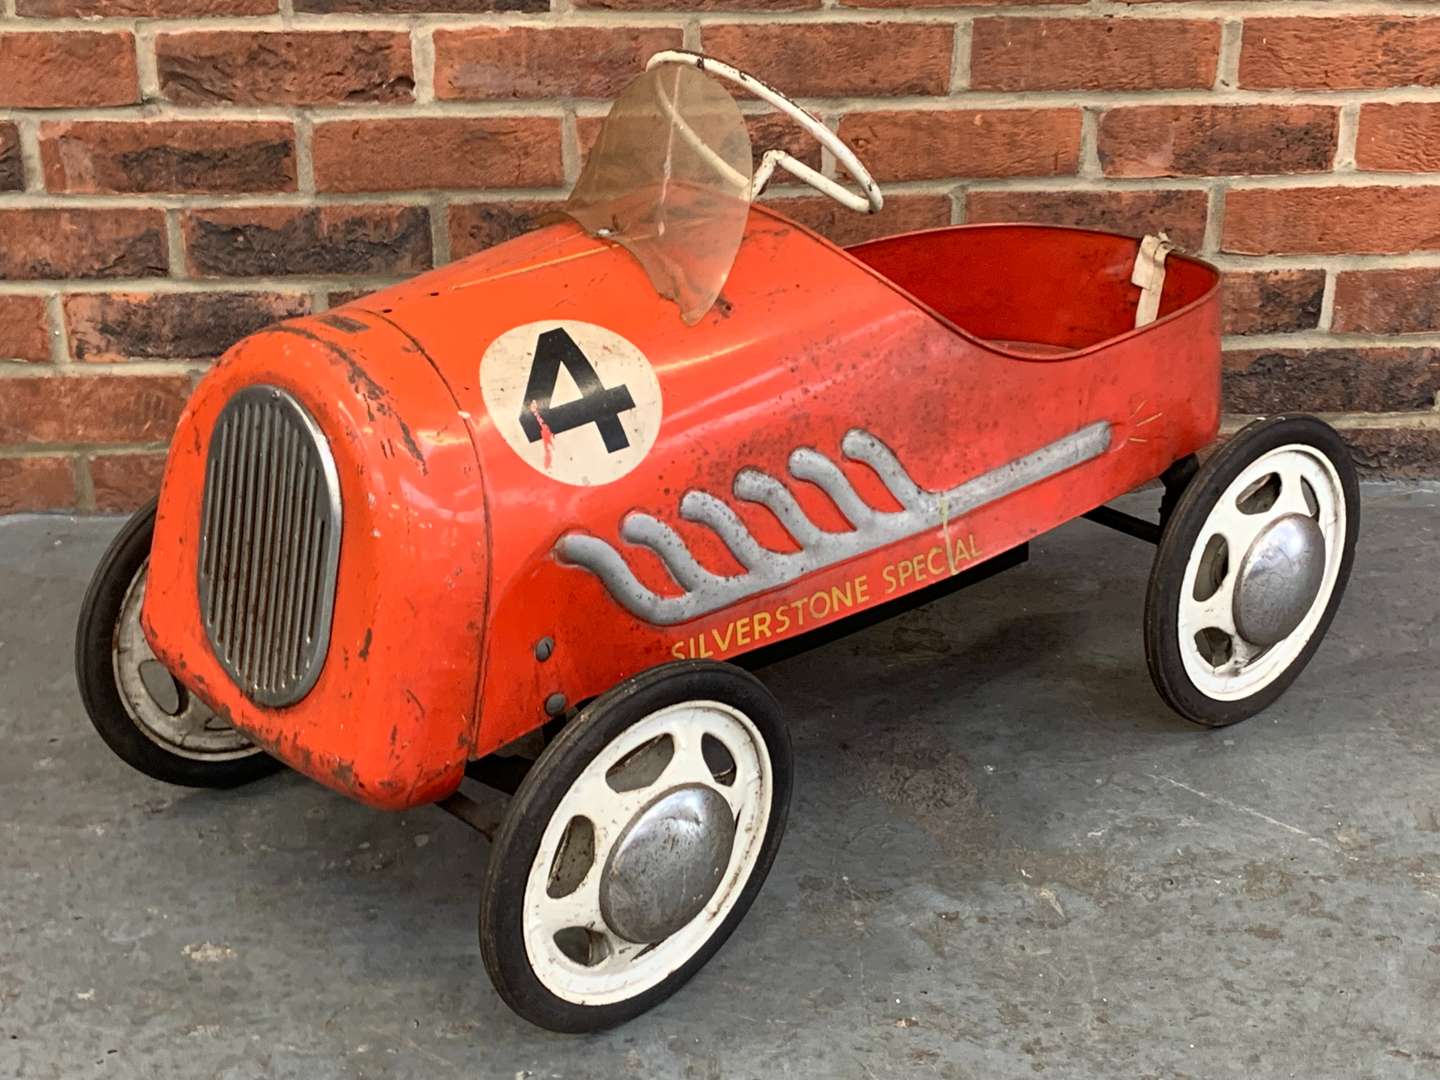 <p>Tri-Ang Silverstone Special Child's Pedal Race Car</p>